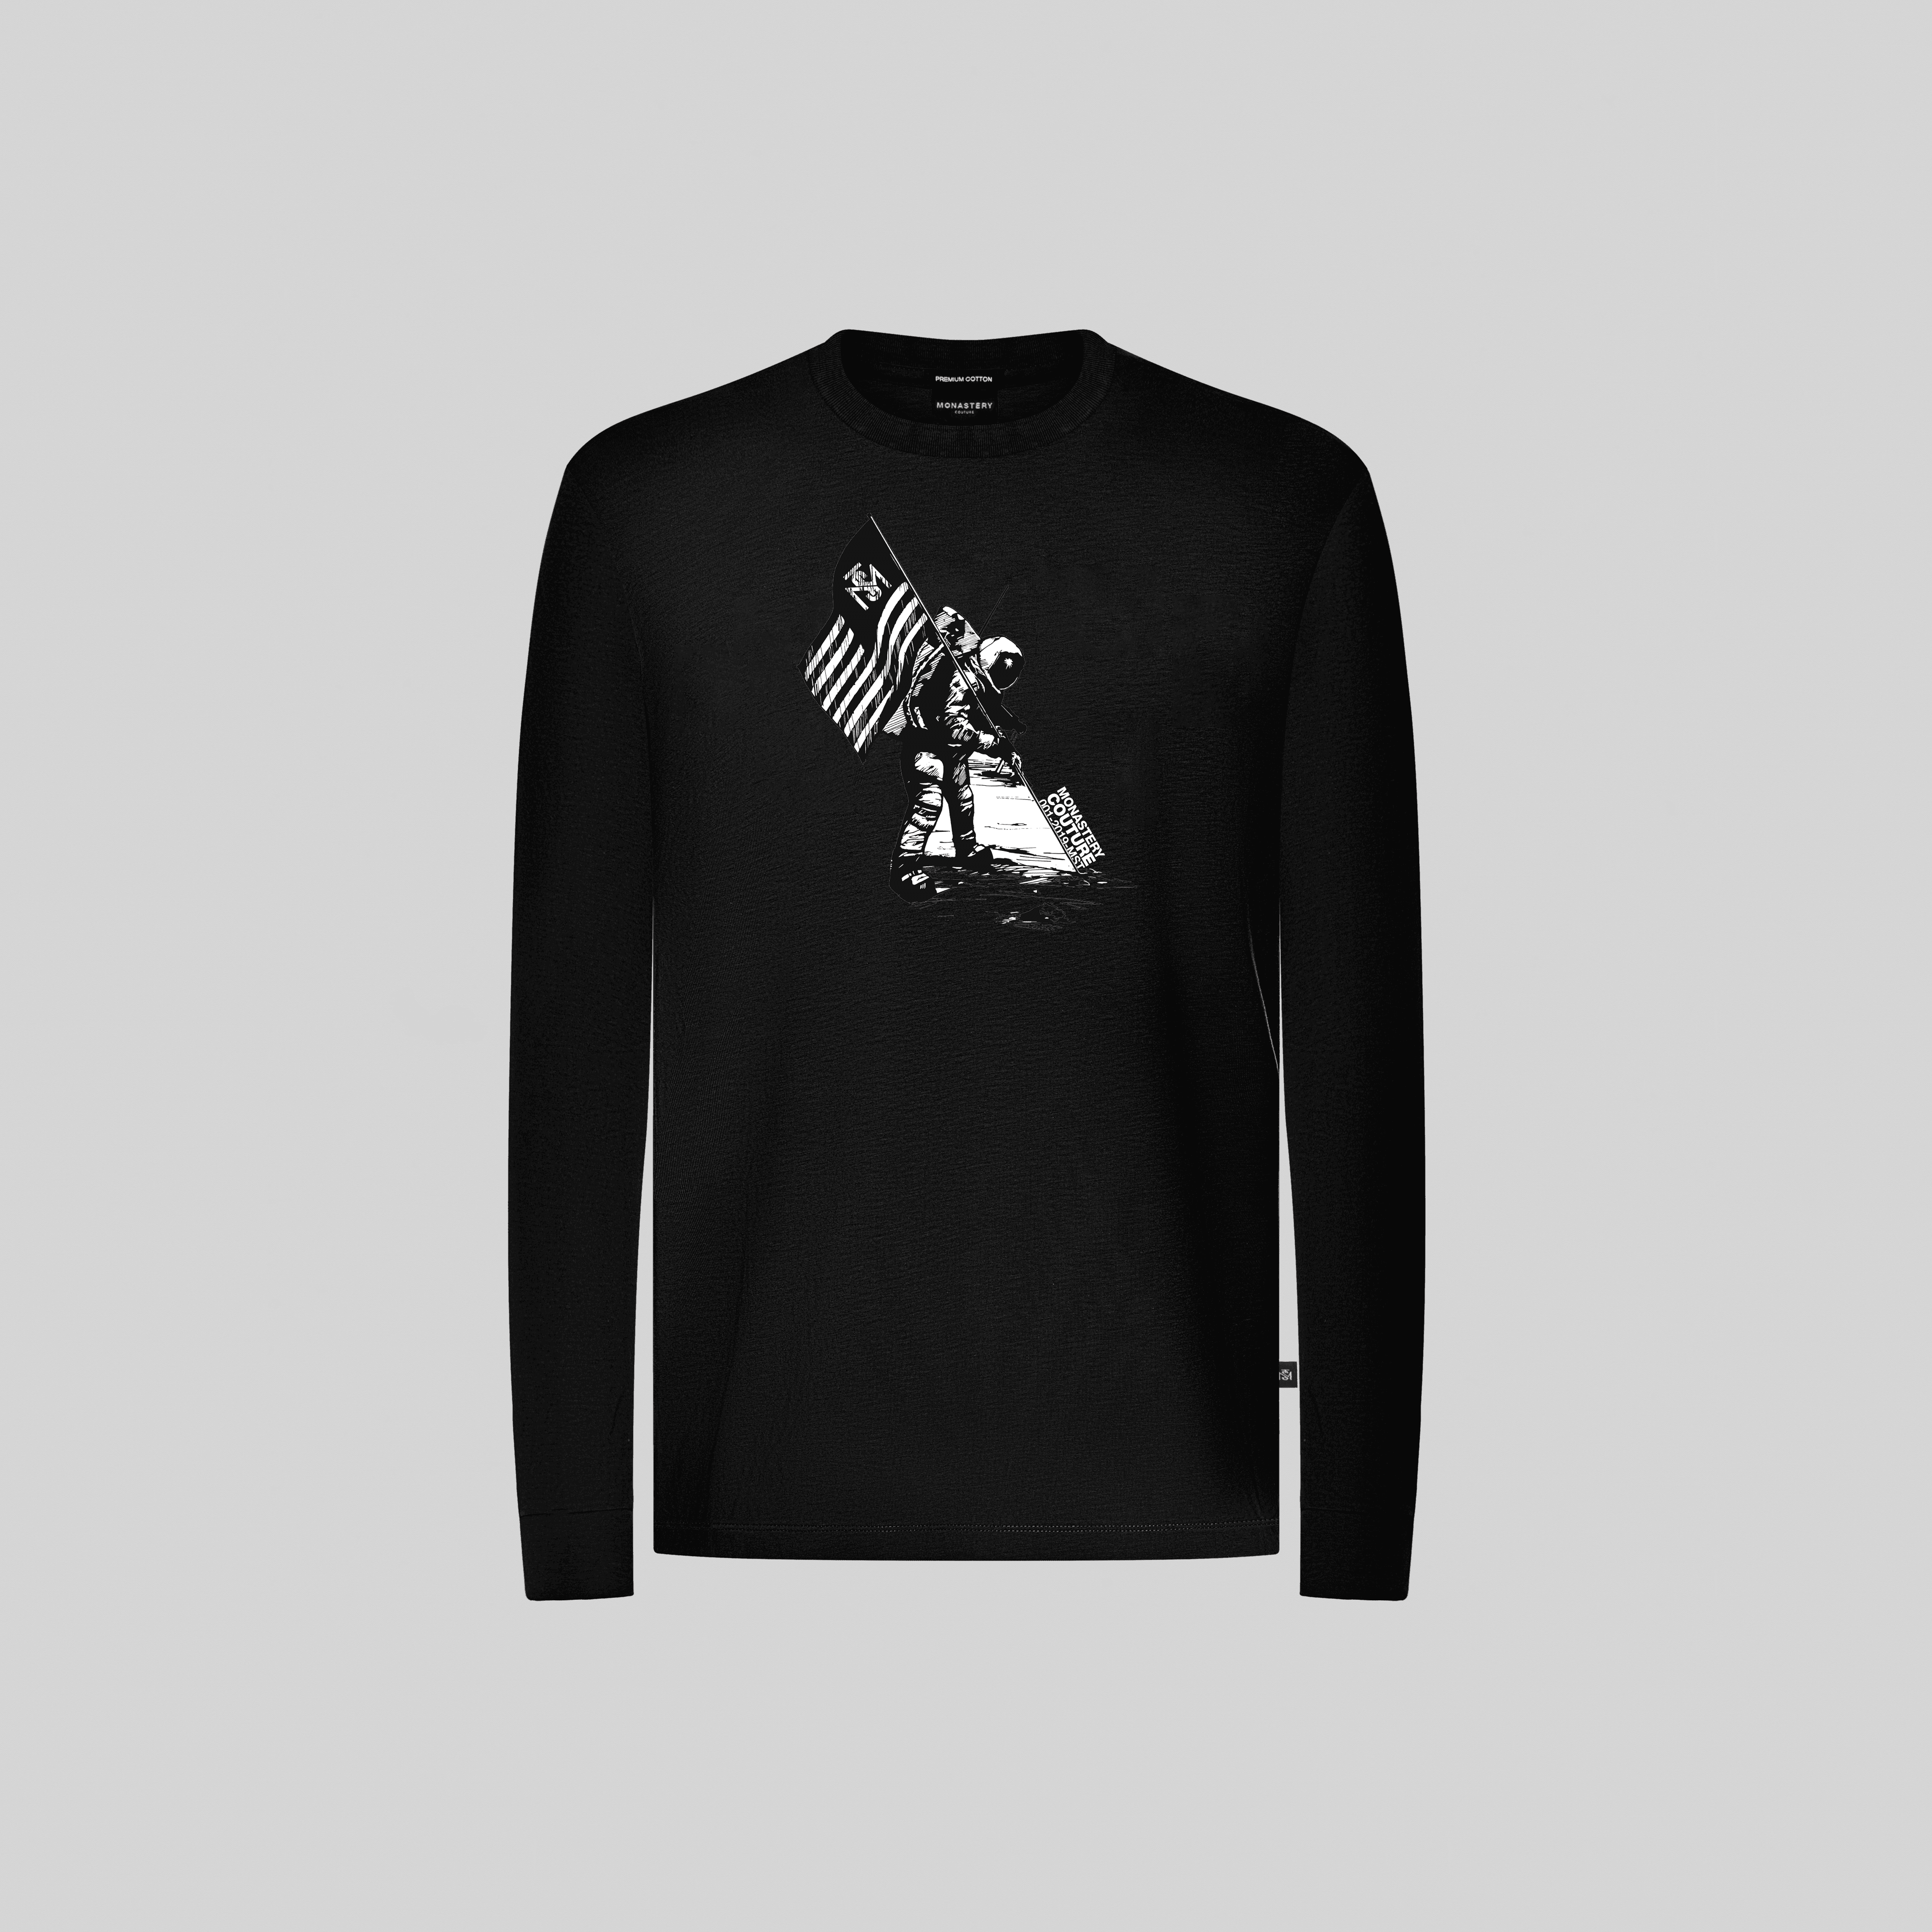 MENFIS BLACK LONG SLEEVE | Monastery Couture